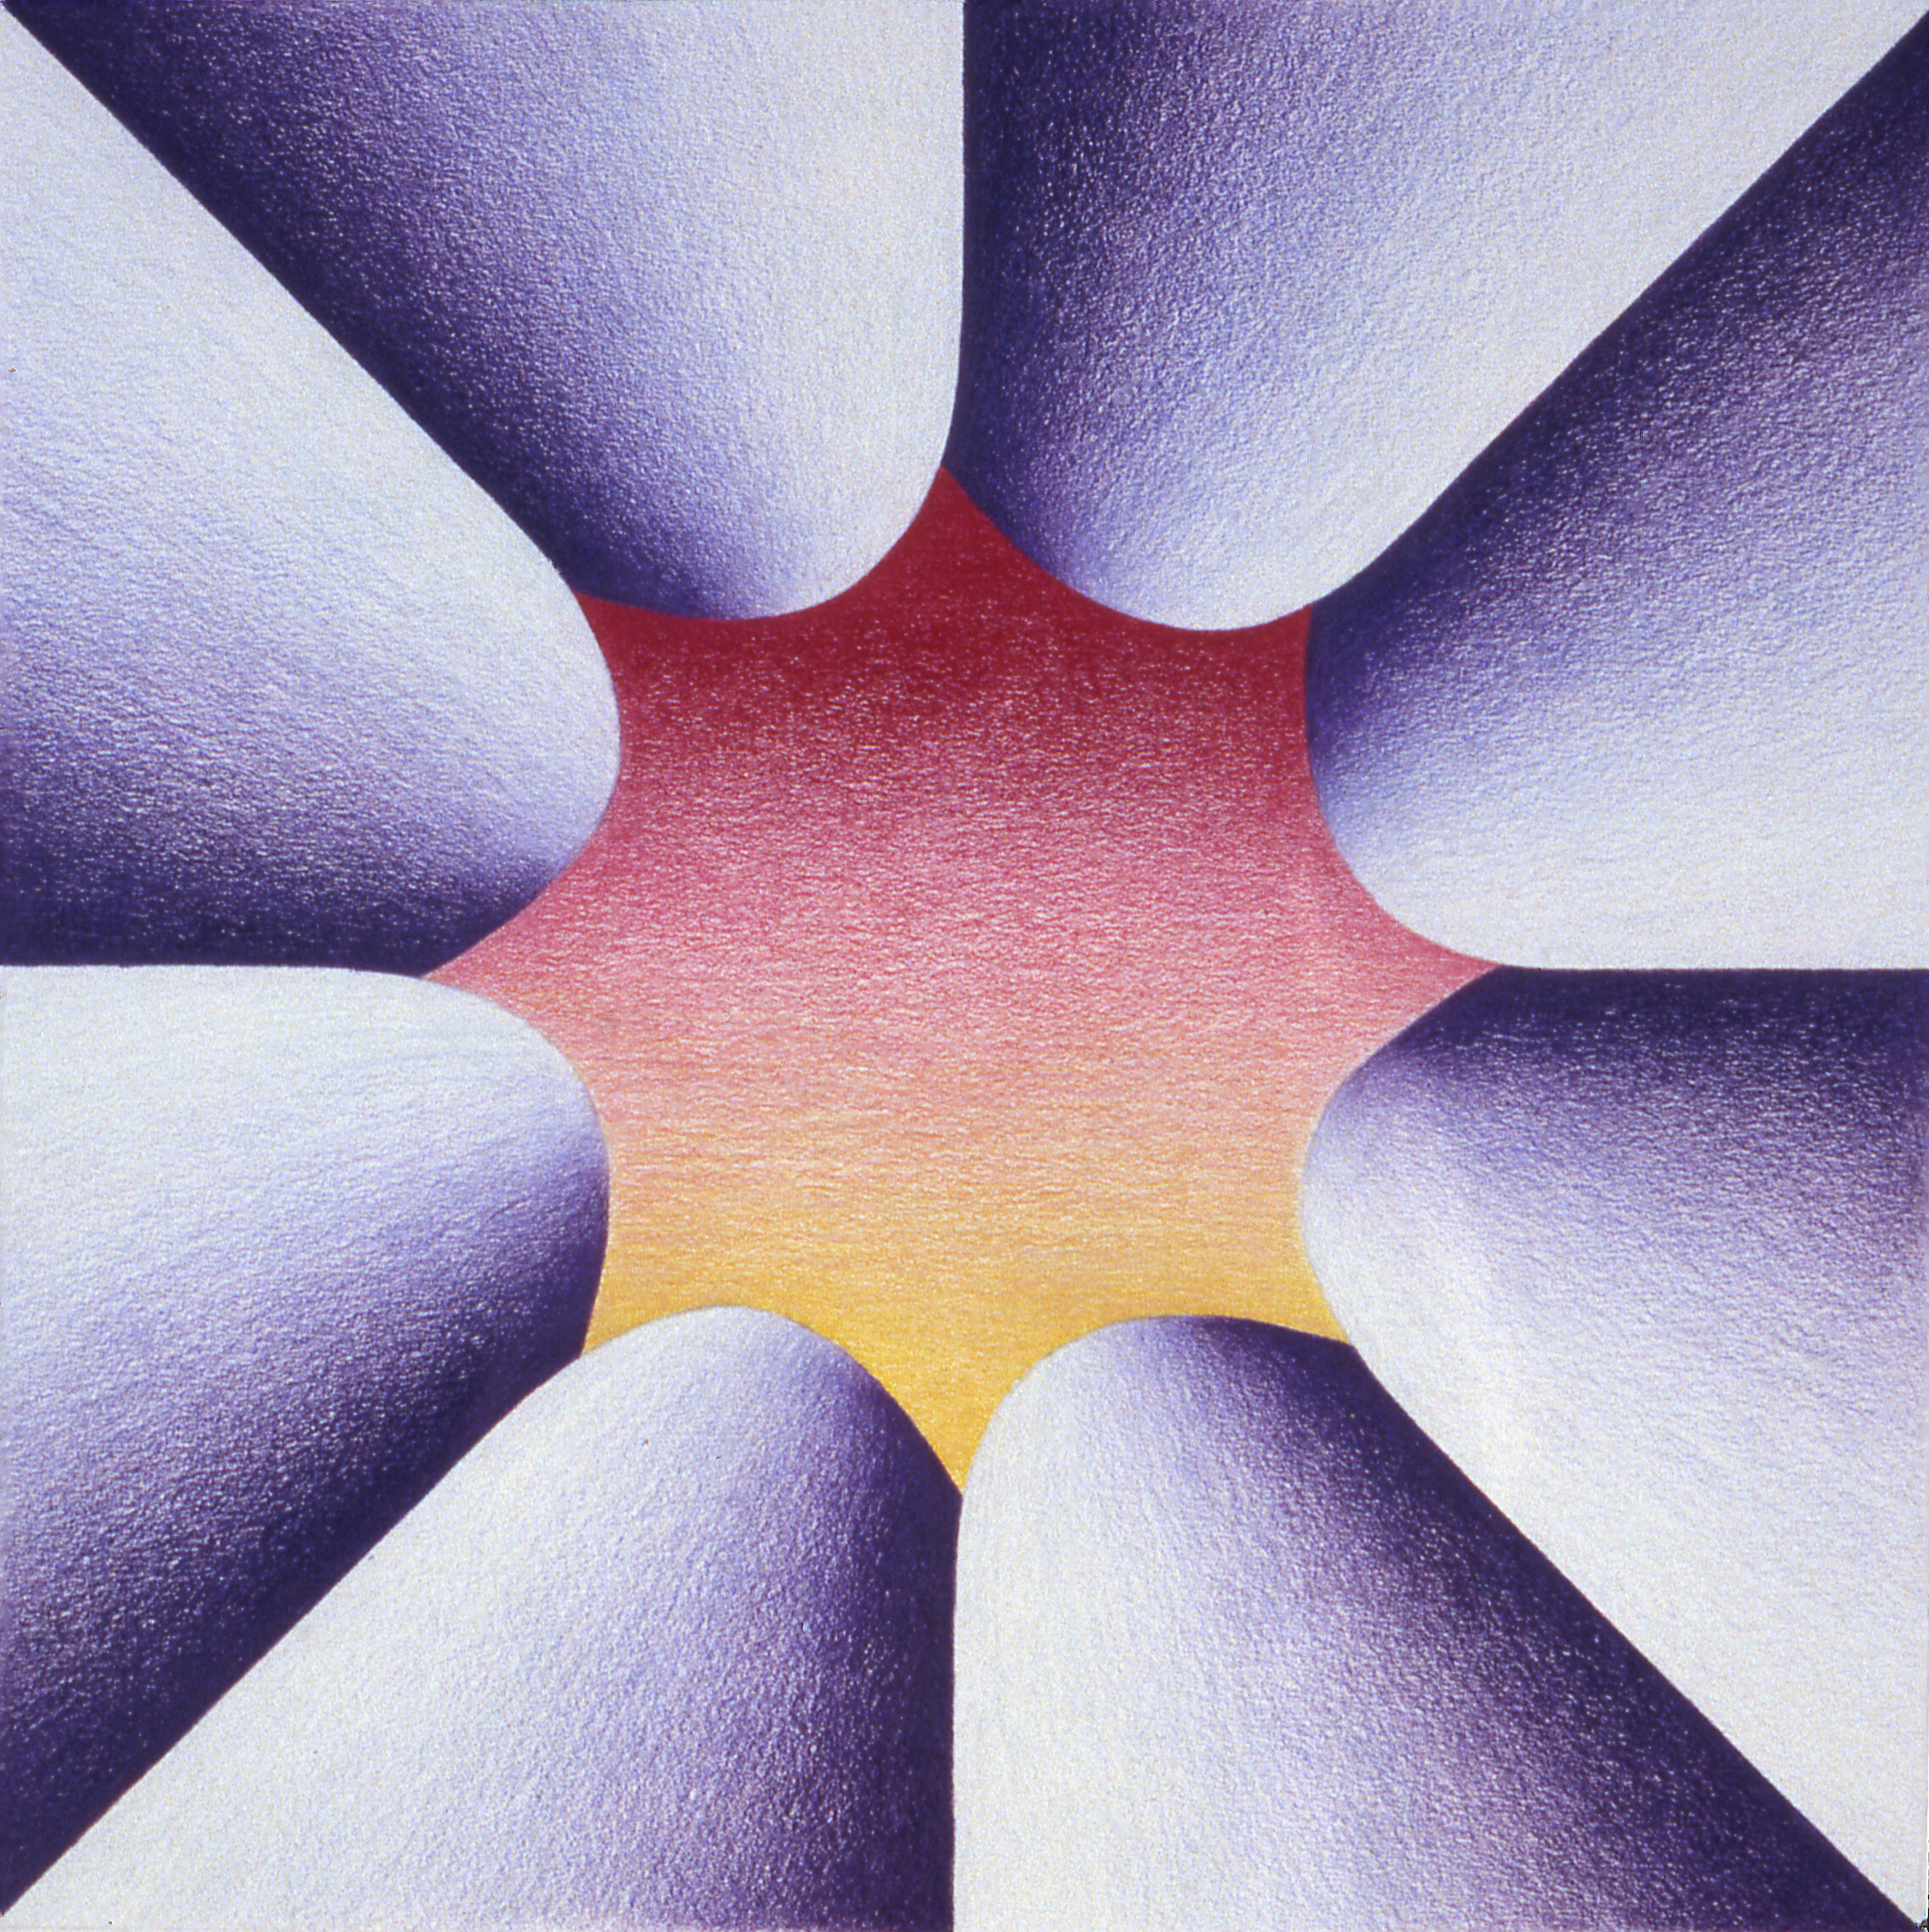 A lilac and red, abstract flower. The inner part in red and yellow looks like a sun, while the lilac leaves are reminiscent of mountains, stacked neatly around the sun.